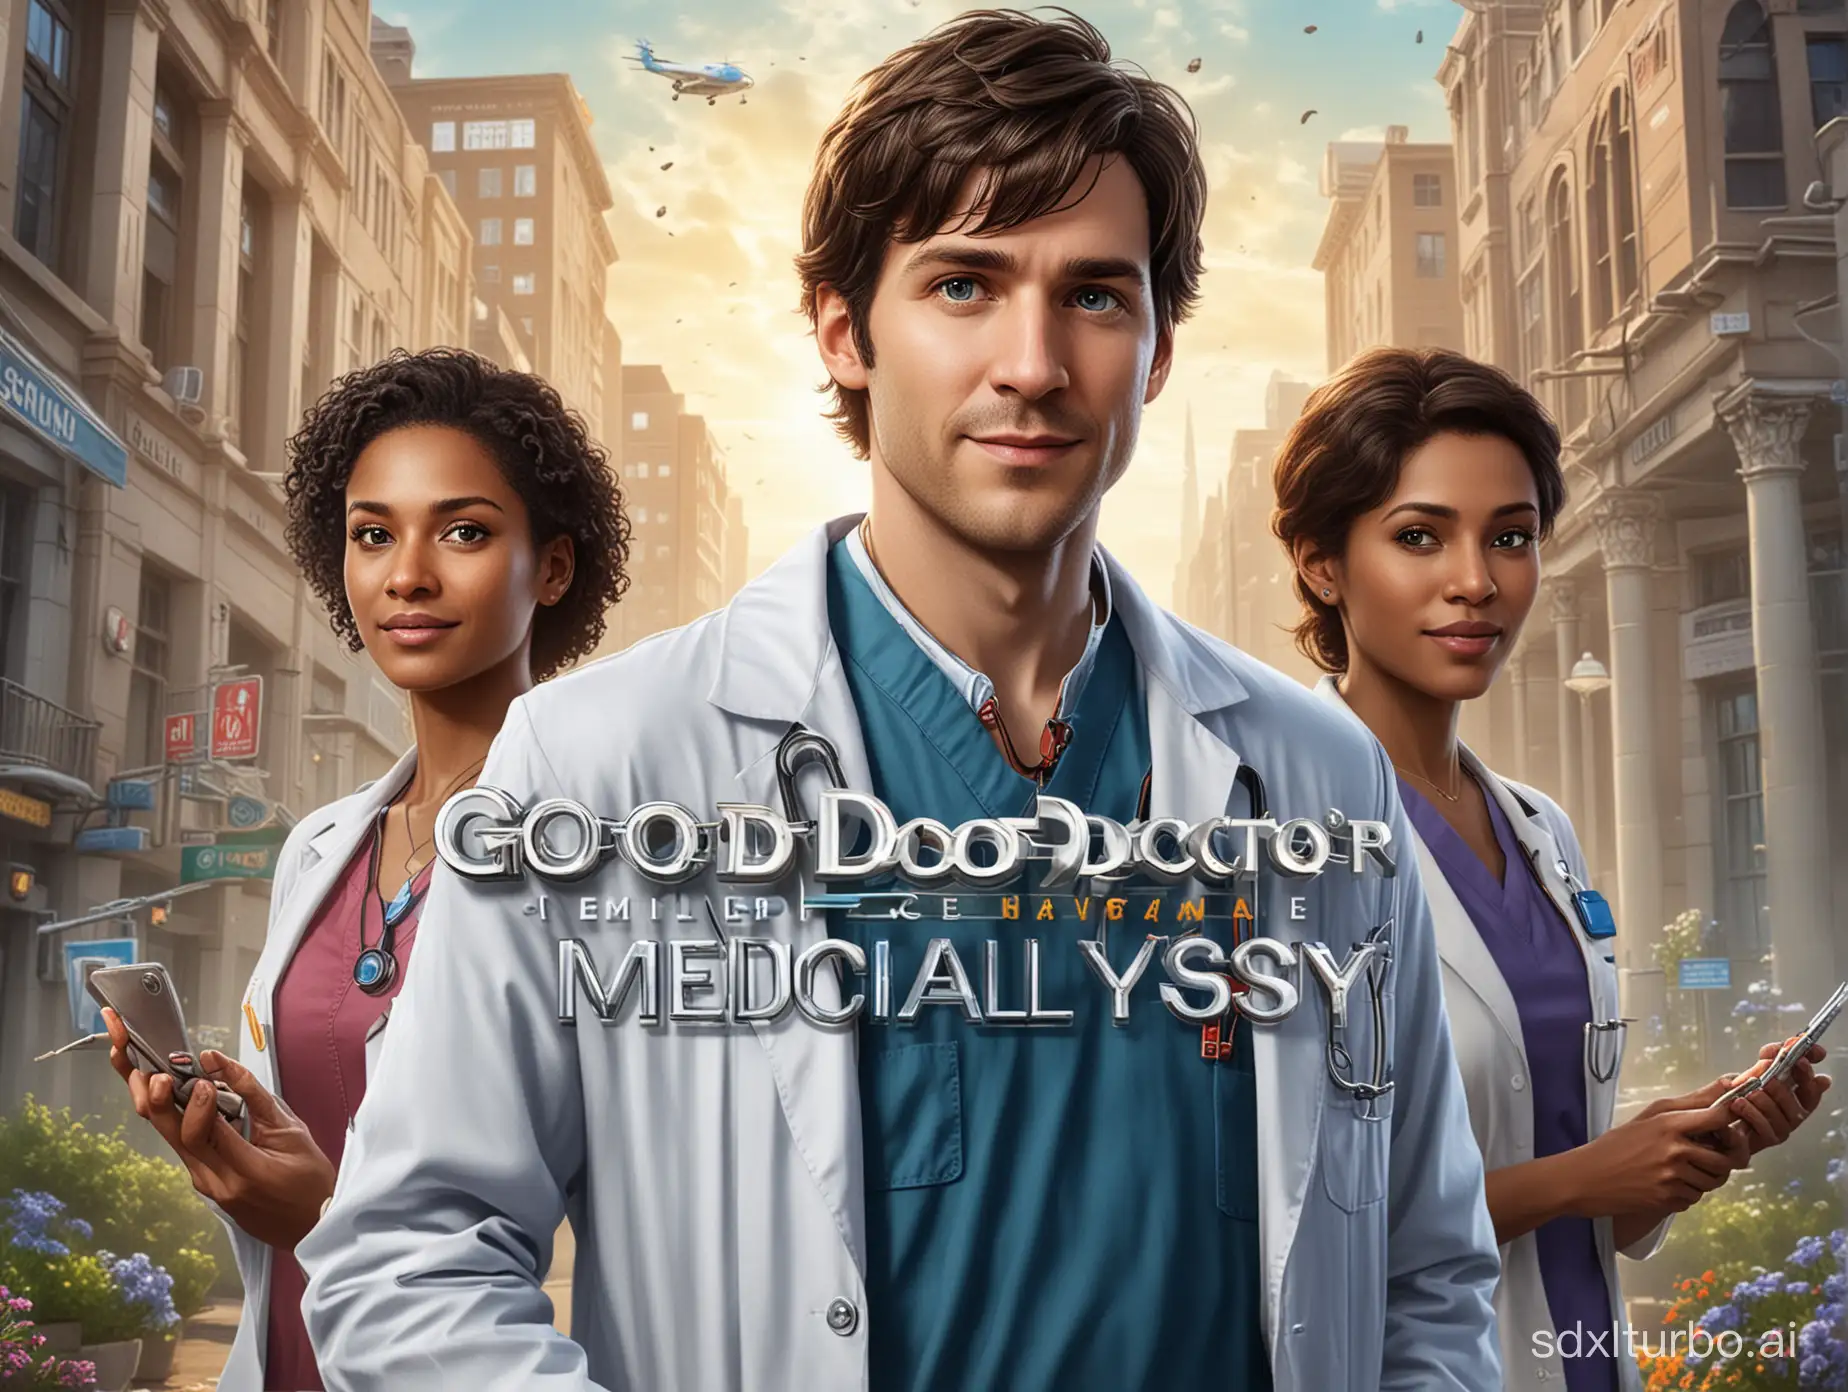 Realistic-PC-Game-Cover-Art-Good-Doctor-Embarks-on-a-Medical-Odyssey